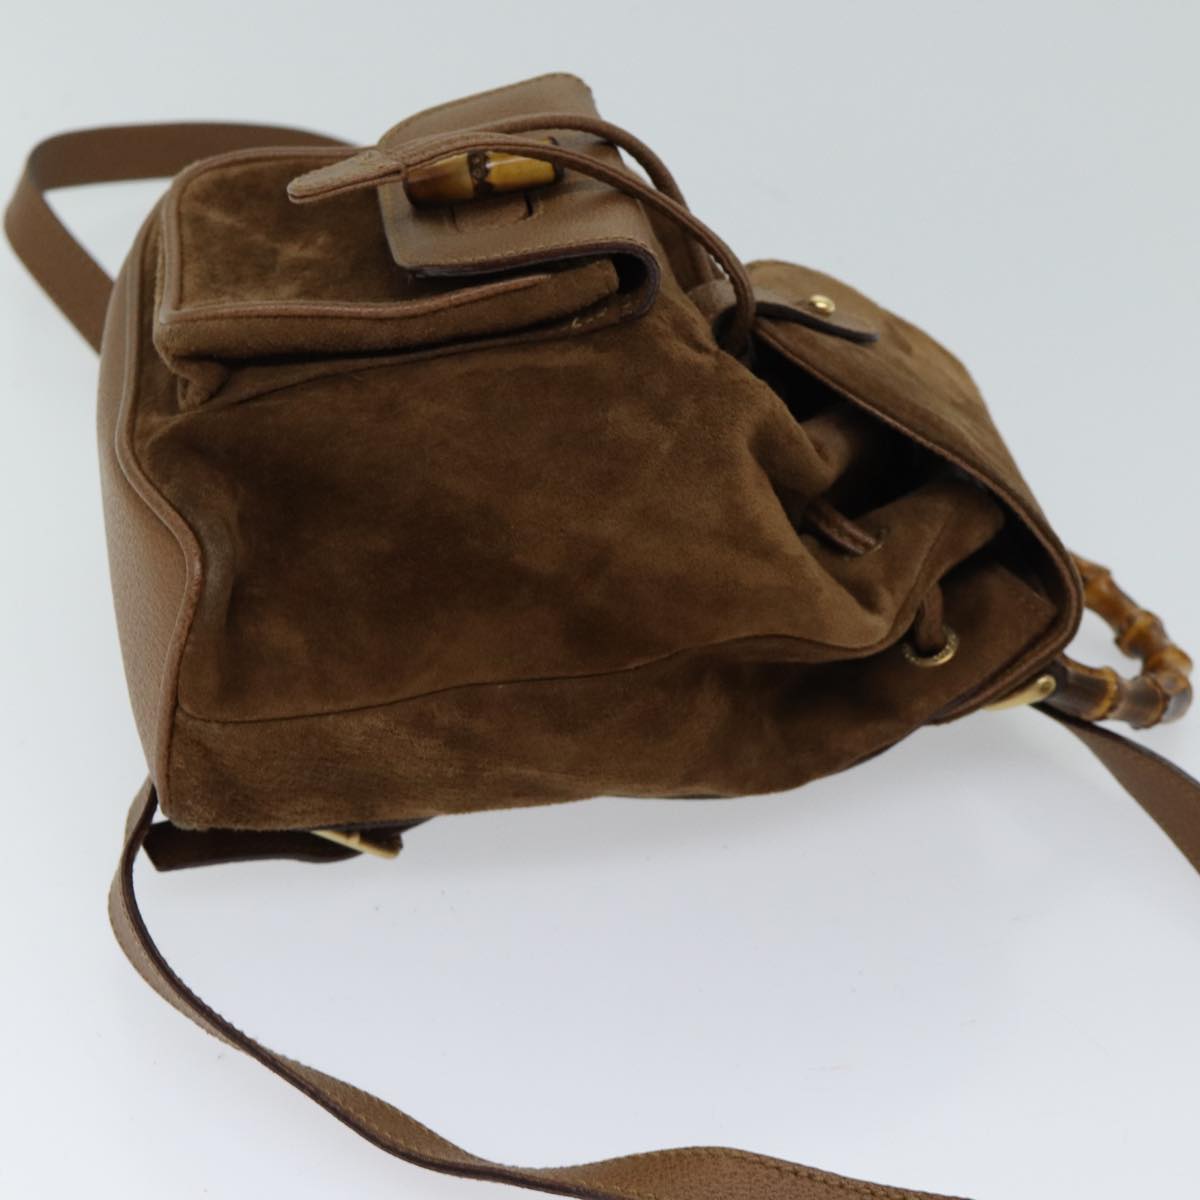 GUCCI Bamboo Backpack Suede Brown 003 2852 0030 0 Auth yk11526